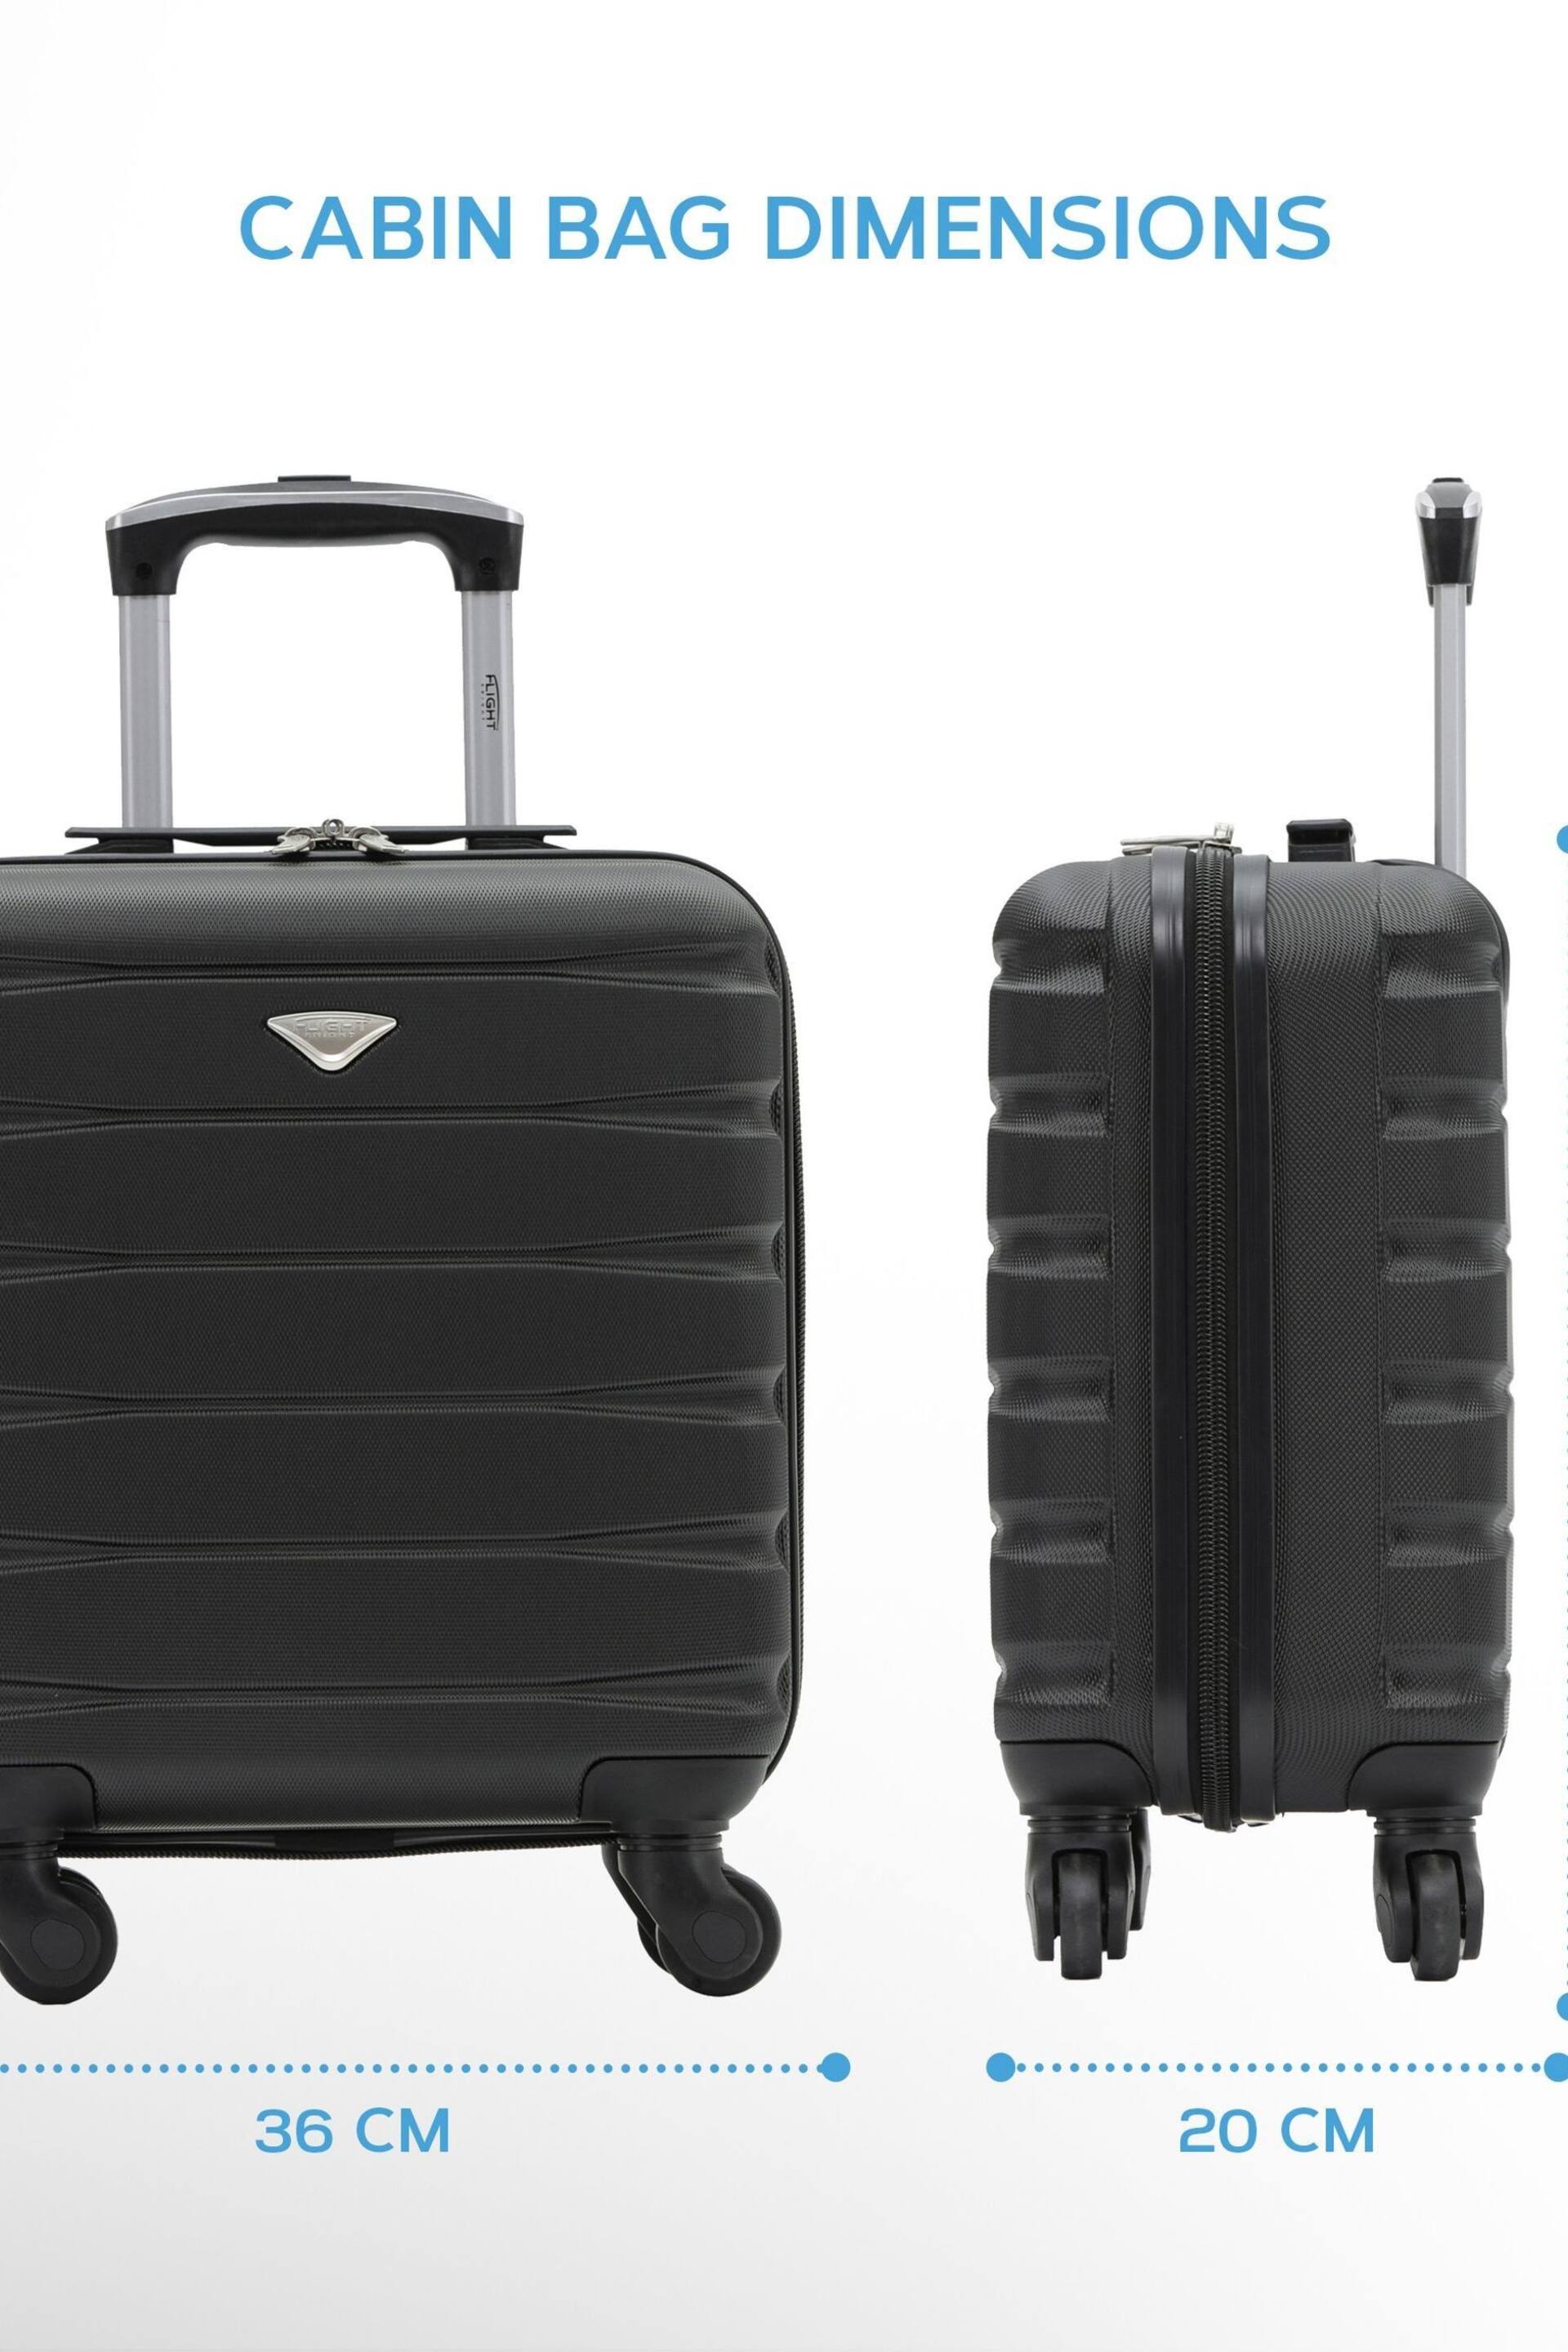 Flight Knight EasyJet Underseat 45x36x20cm 4 Wheel ABS Hard Case Cabin Carry On Suitcase Set Of 2 - Image 3 of 8